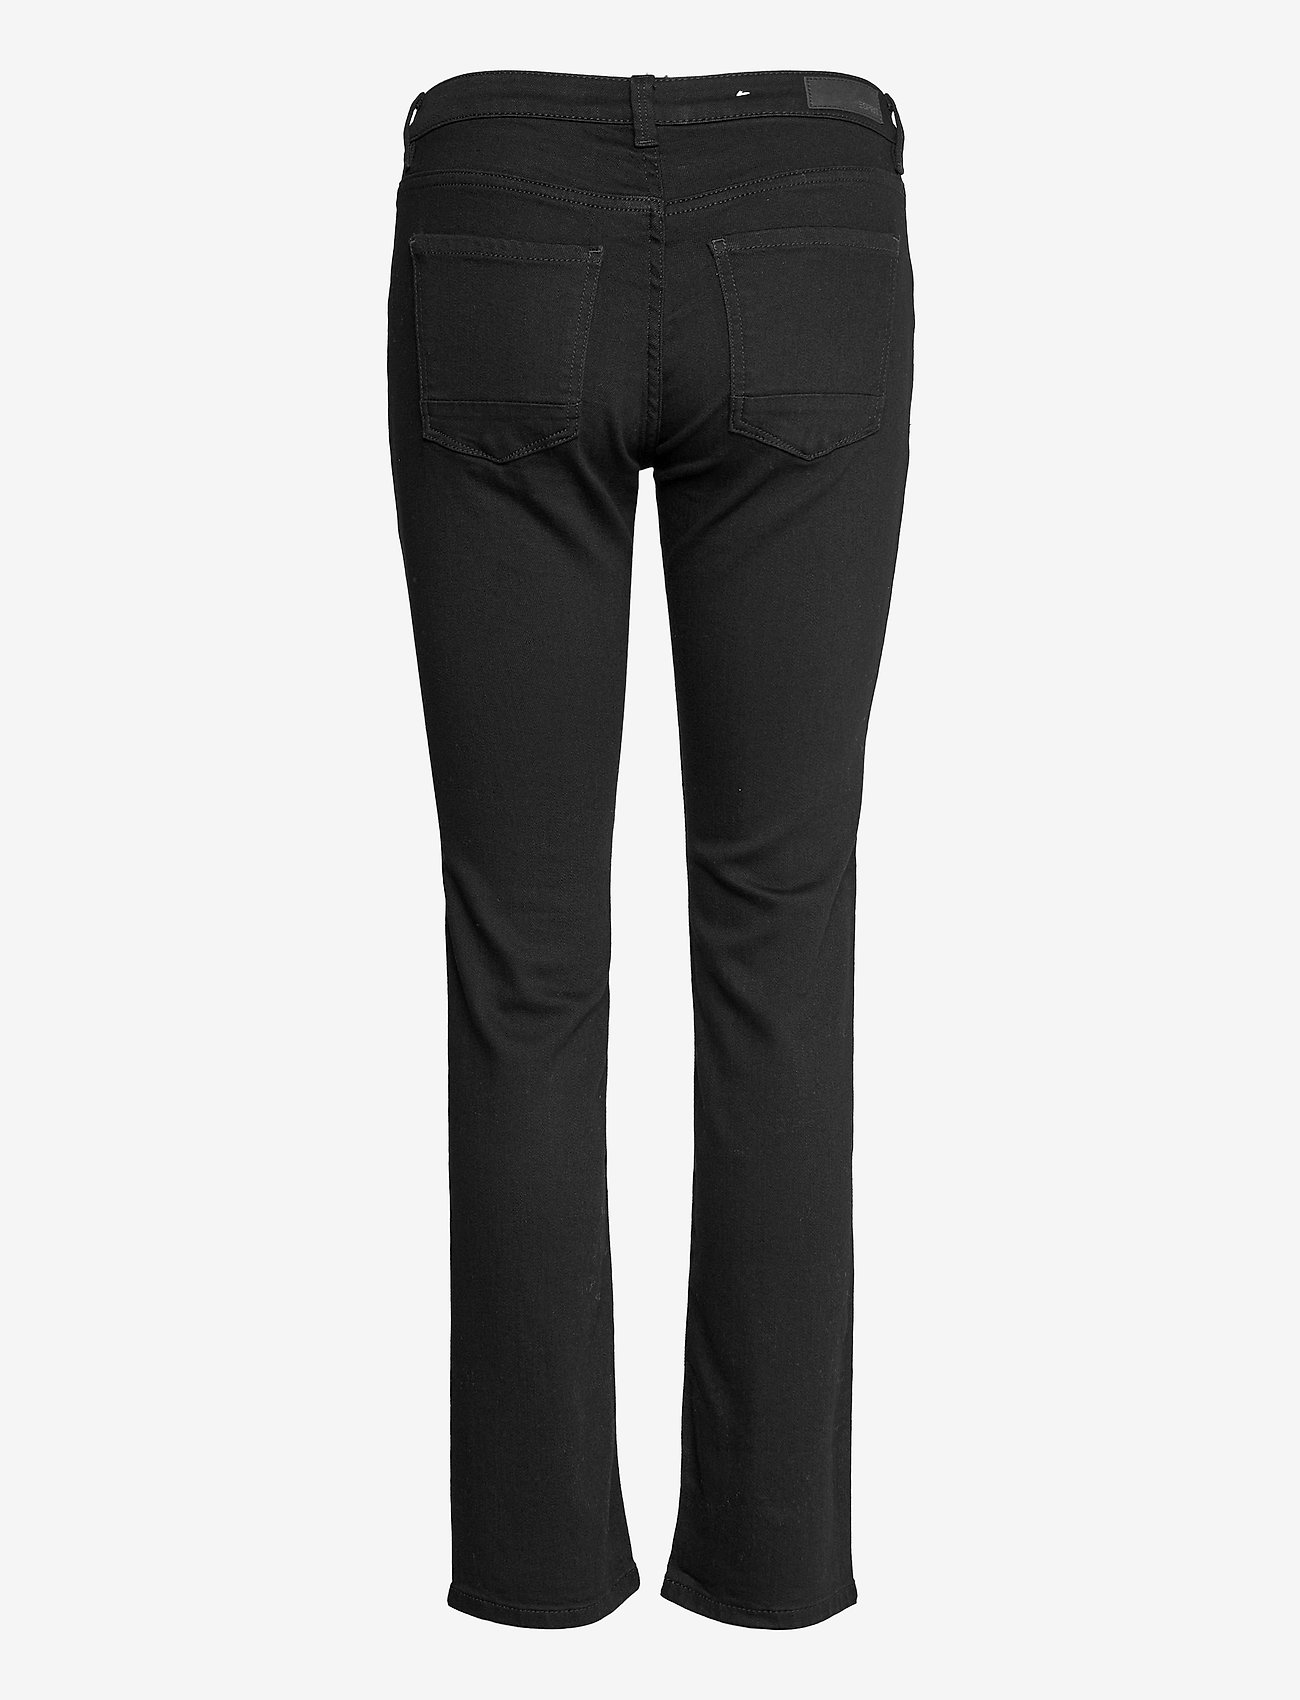 Esprit Casual - Stretch jeans with organic cotton - slim jeans - black rinse - 1